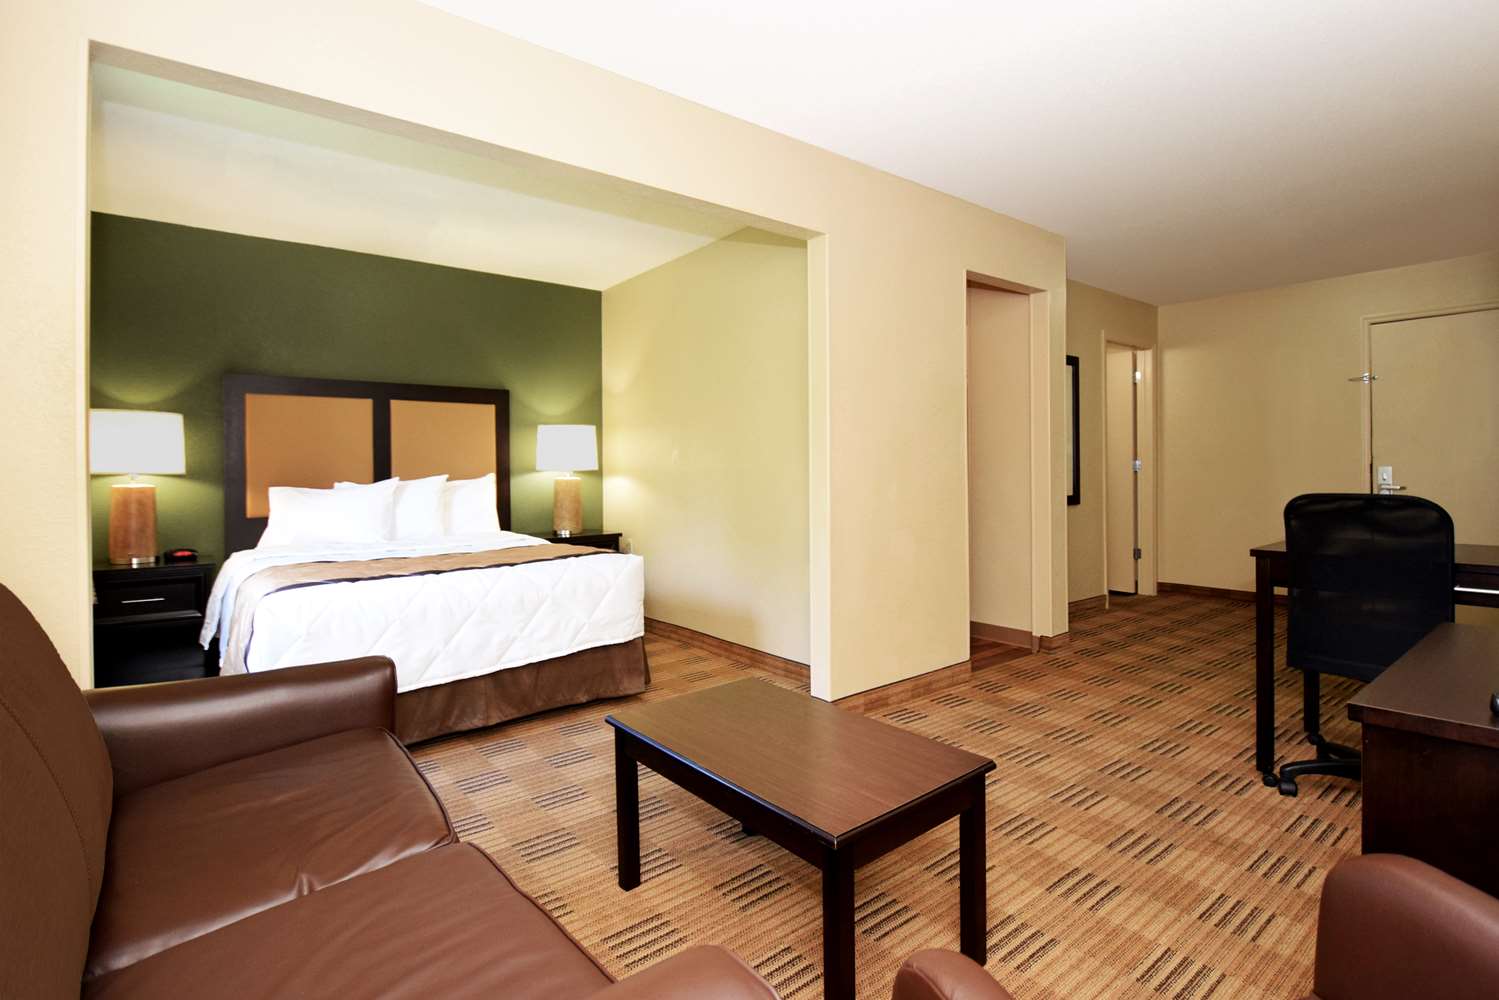 Why Should You Choose An Extended Stay Hotel Suite?